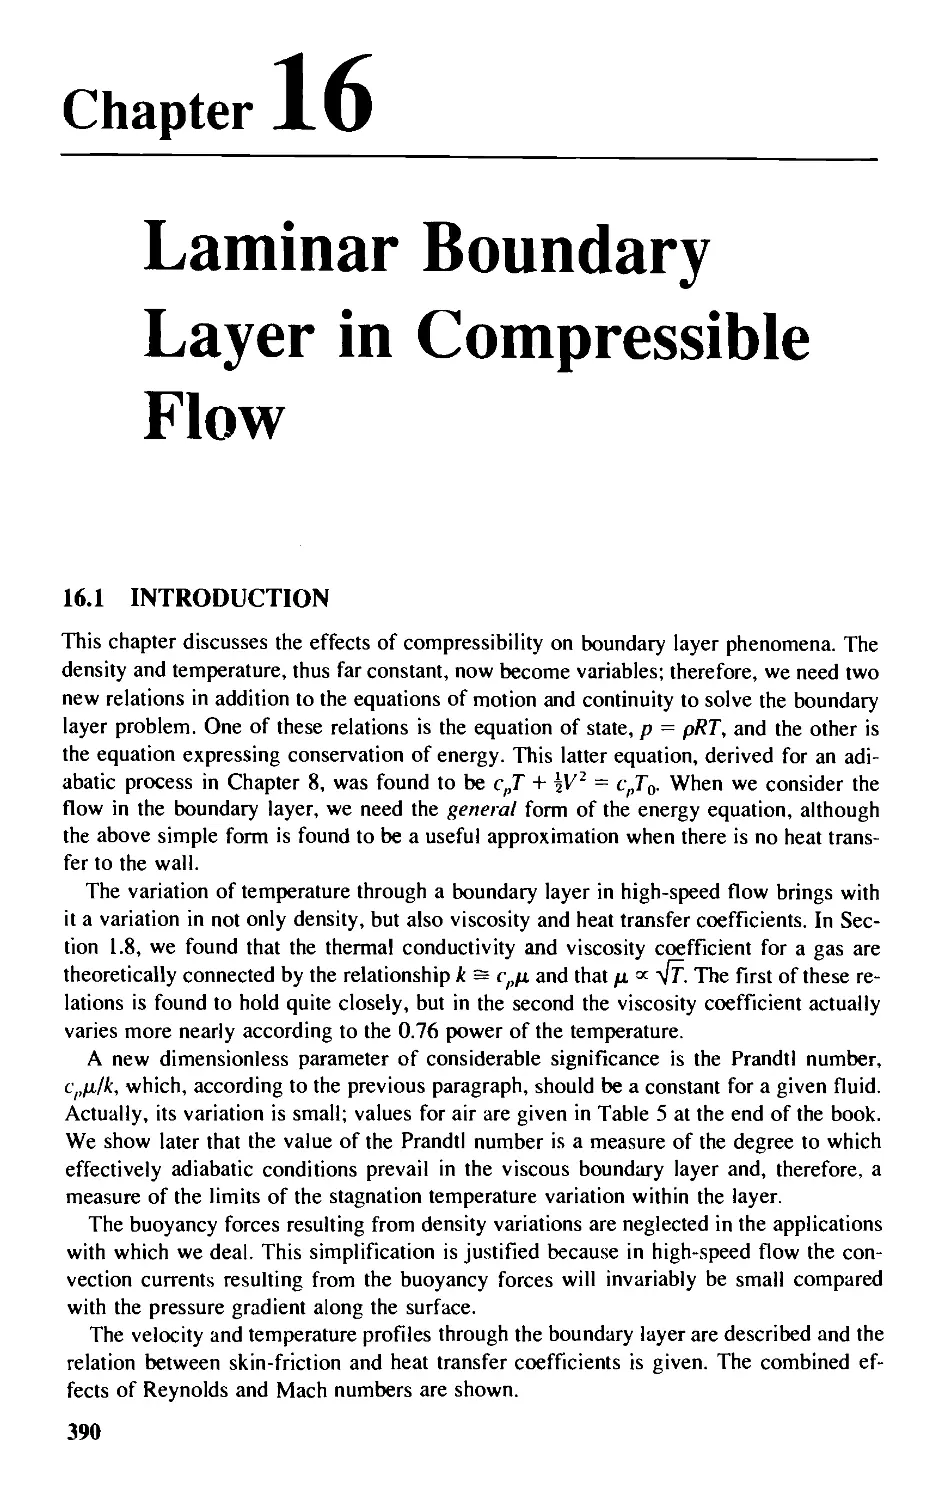 Chapter 16 - Laminar Boundary Layer in Compressible Flow